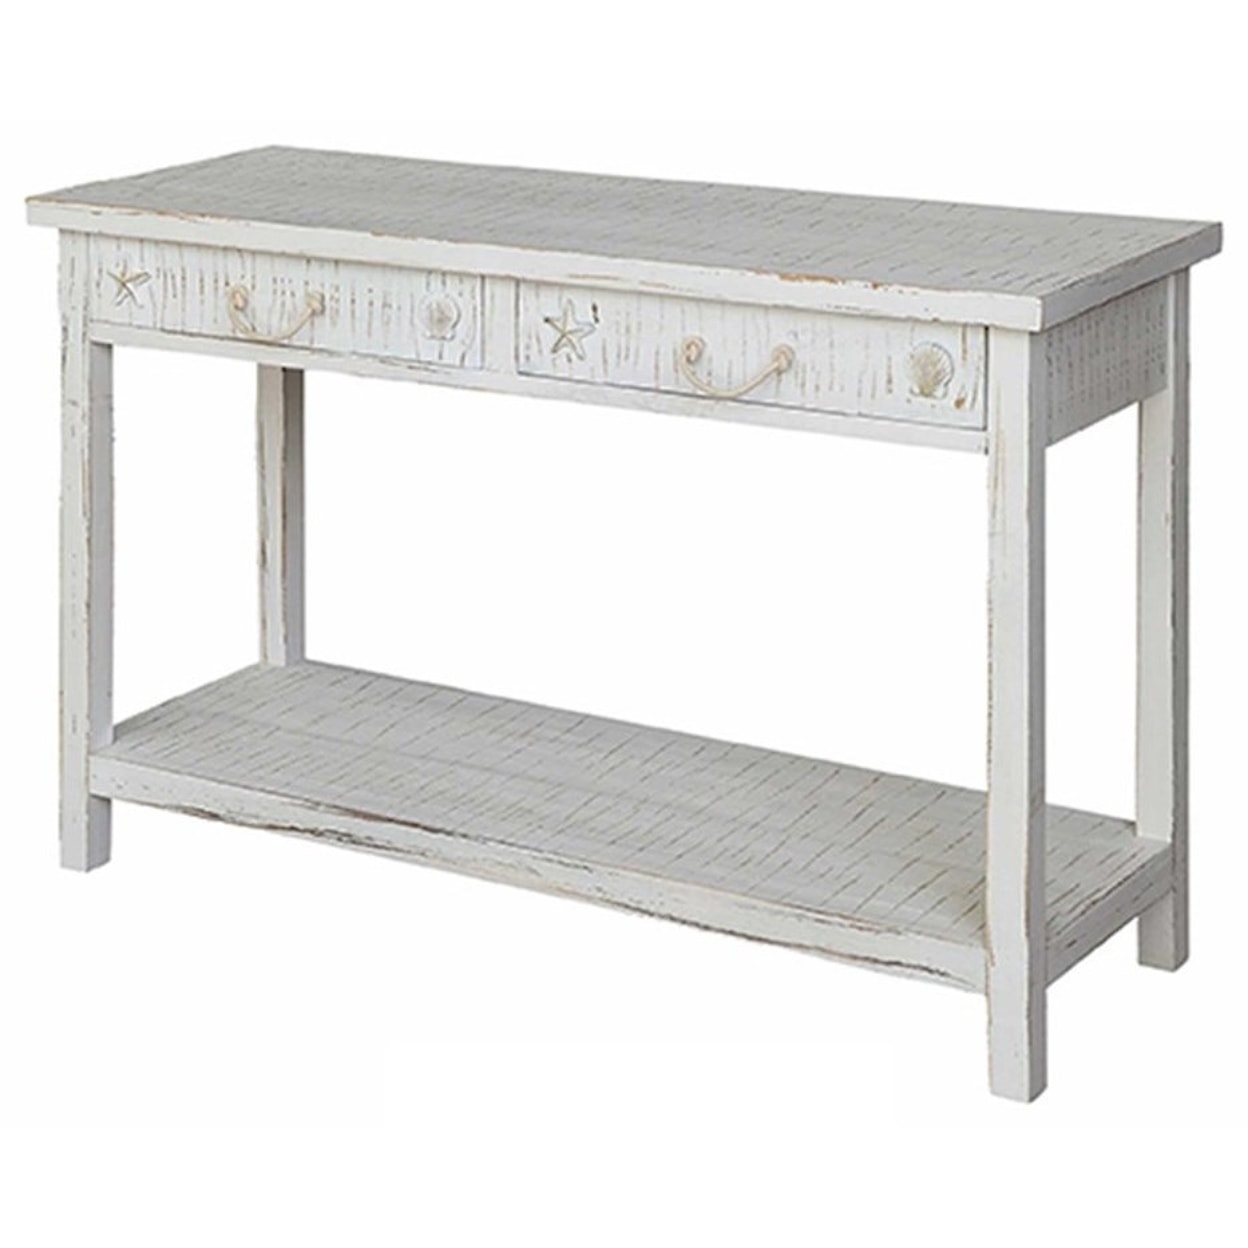 Crestview Collection Accent Furniture Seaside White Coastal Console Table